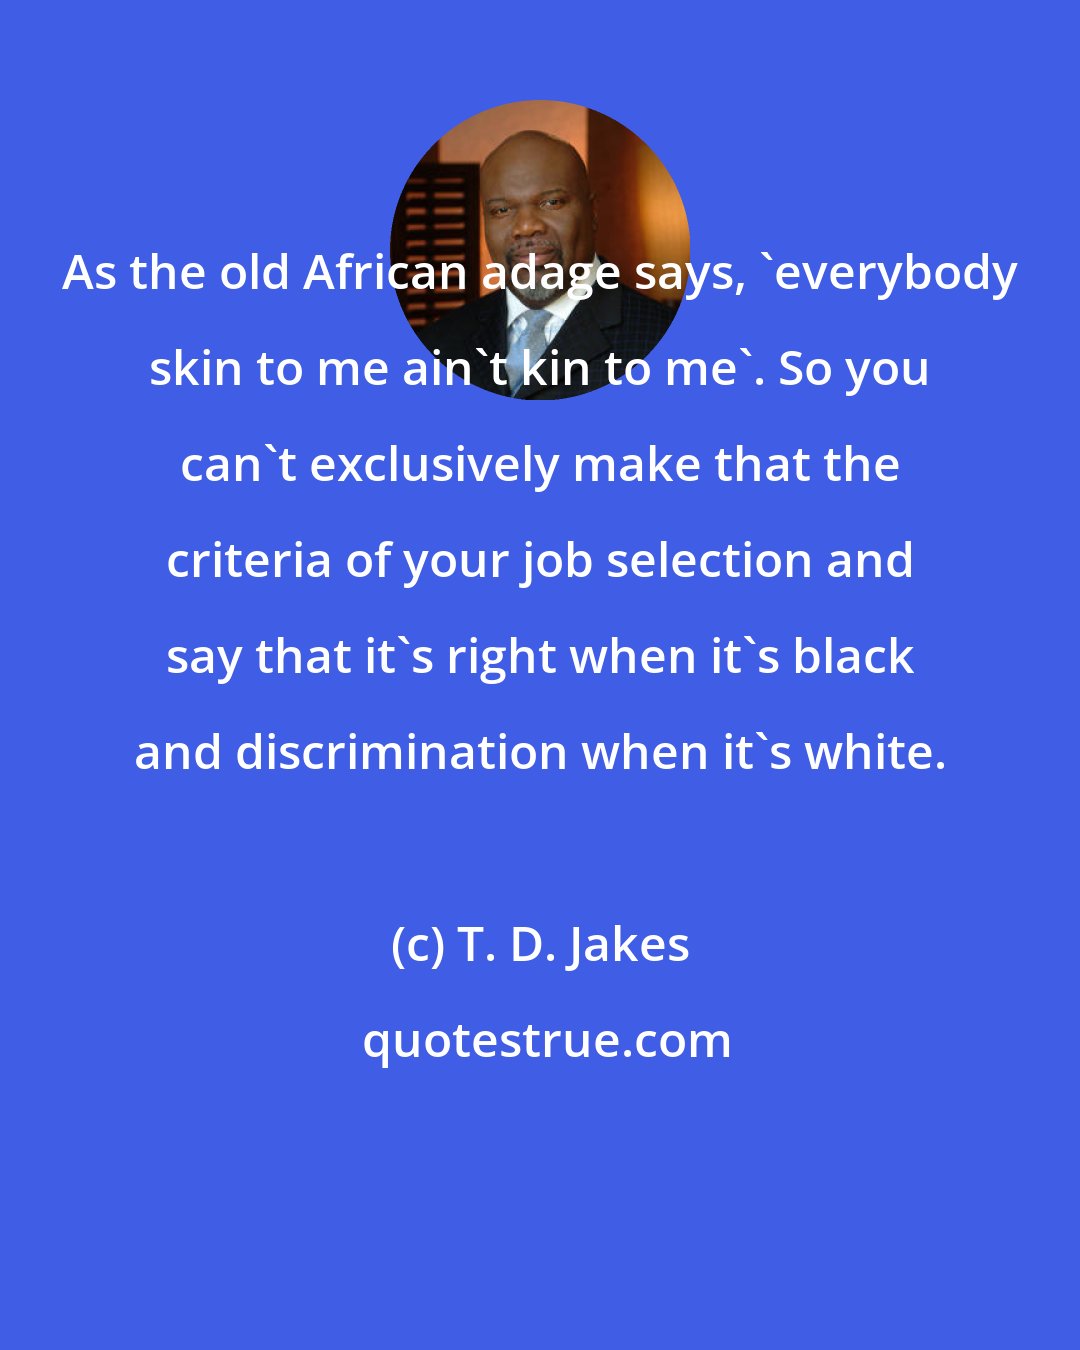 T. D. Jakes: As the old African adage says, 'everybody skin to me ain't kin to me'. So you can't exclusively make that the criteria of your job selection and say that it's right when it's black and discrimination when it's white.